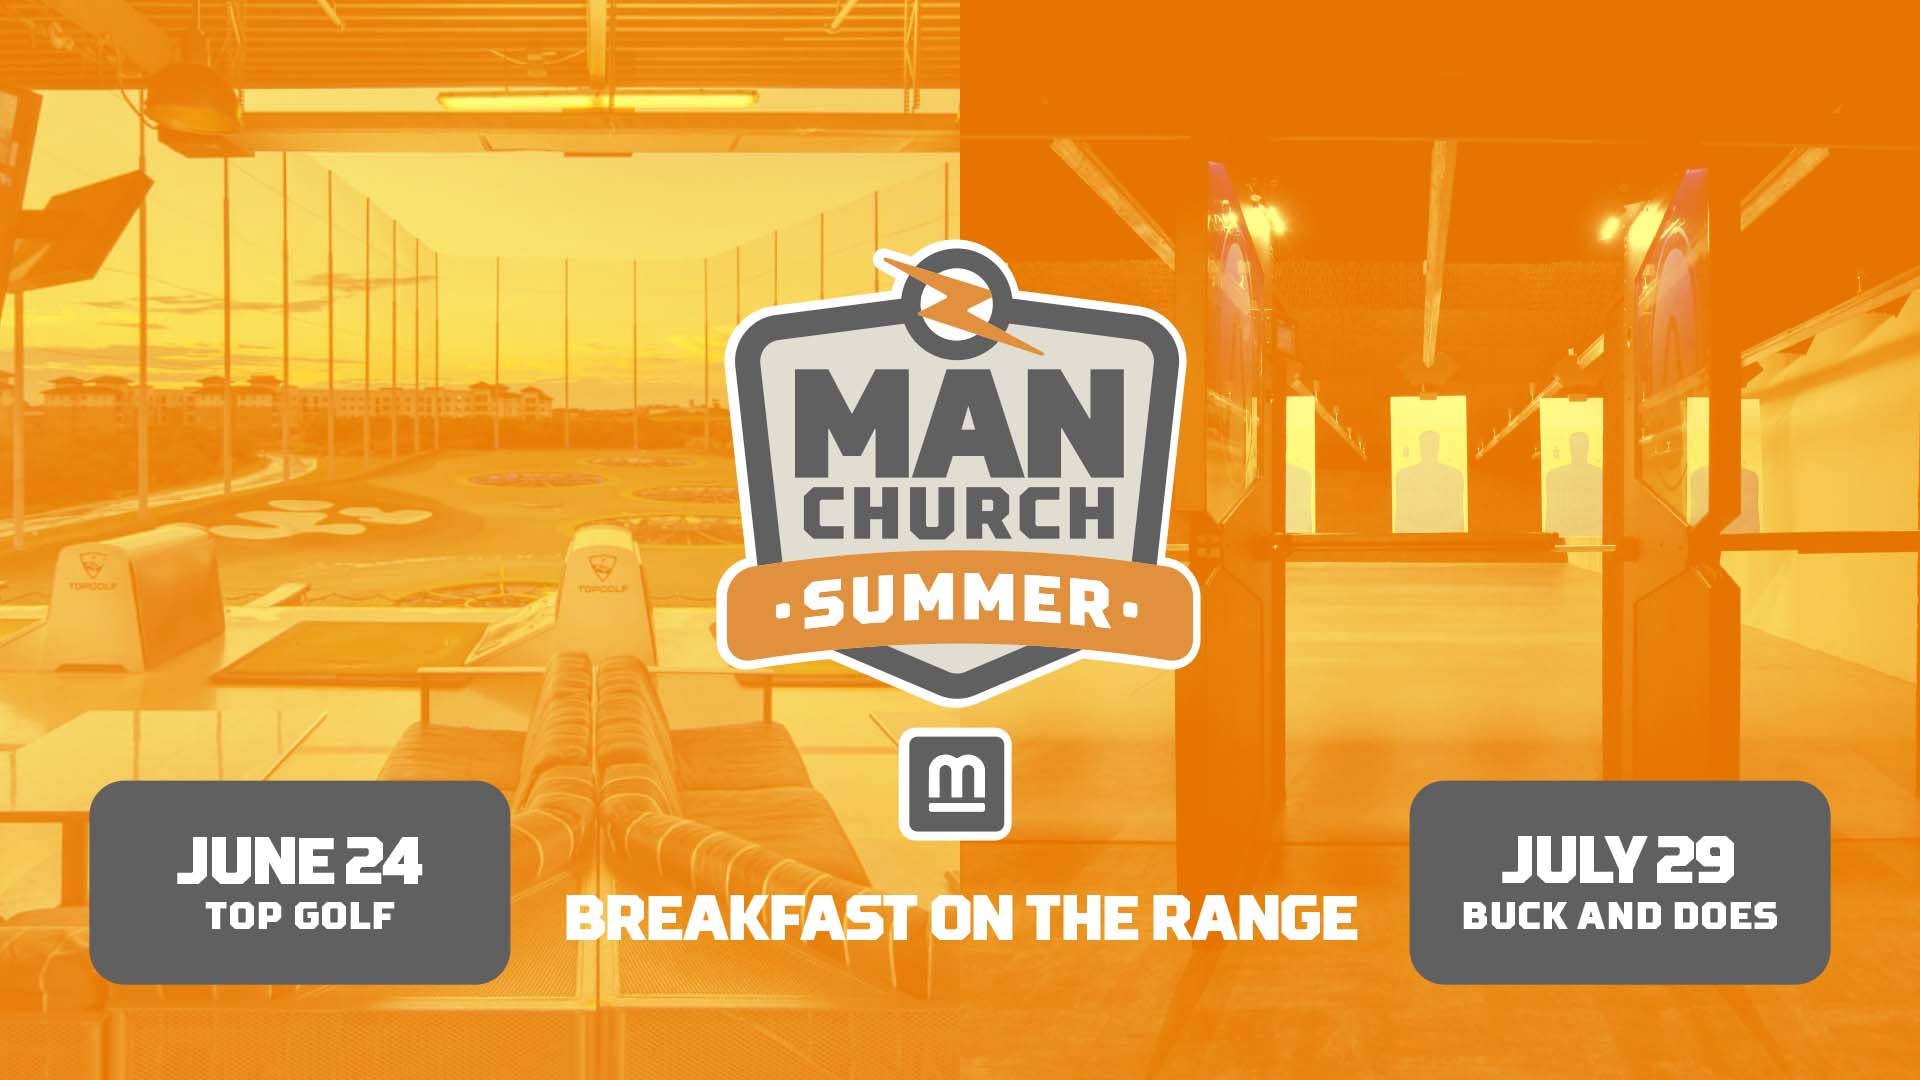 Men's Ministry Summer at Mission City in San Antonio - Top Golf Mission Ridge